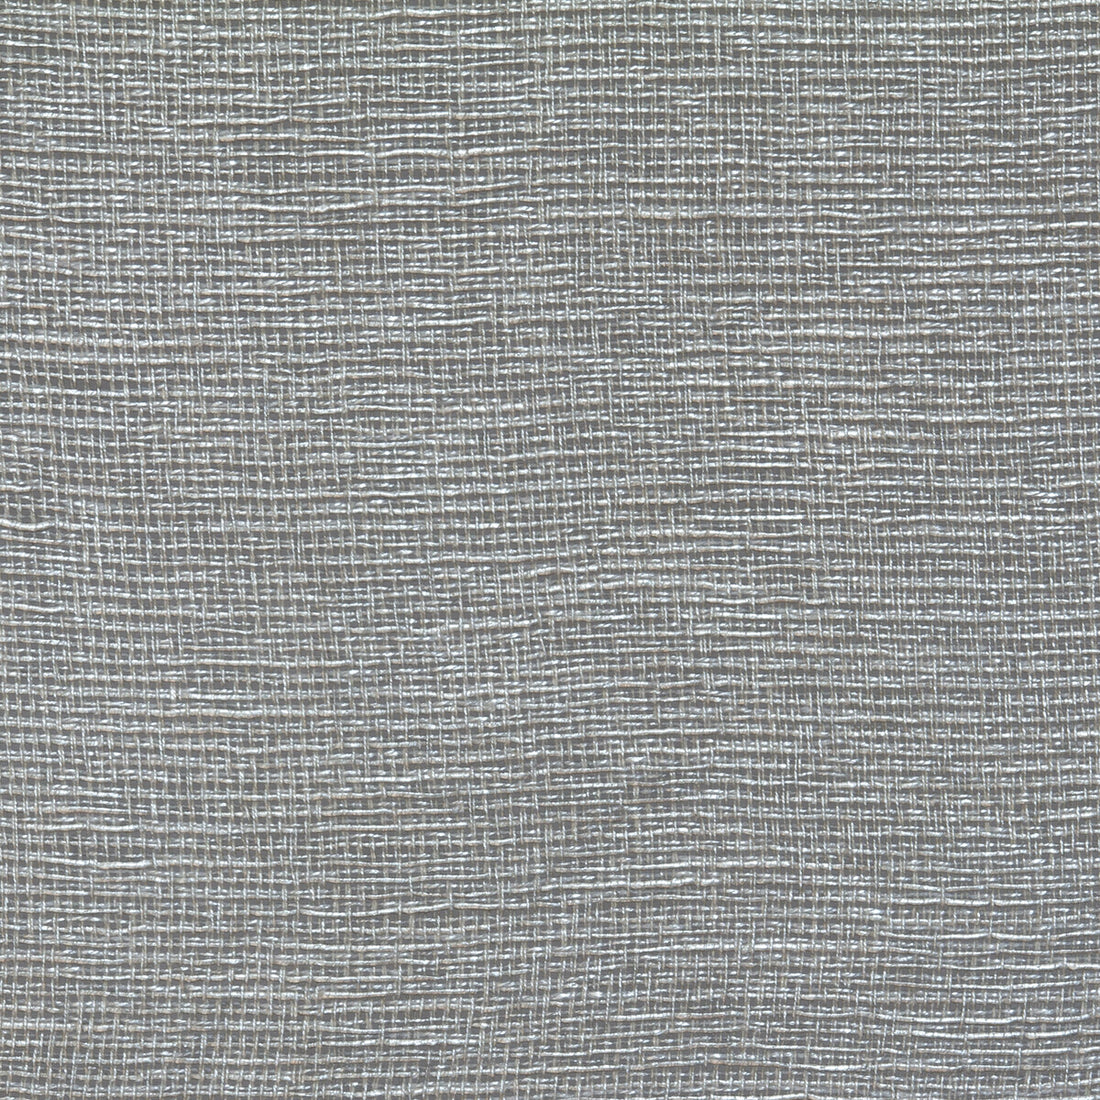 Kravet Couture fabric in 4615-11 color - pattern 4615.11.0 - by Kravet Couture